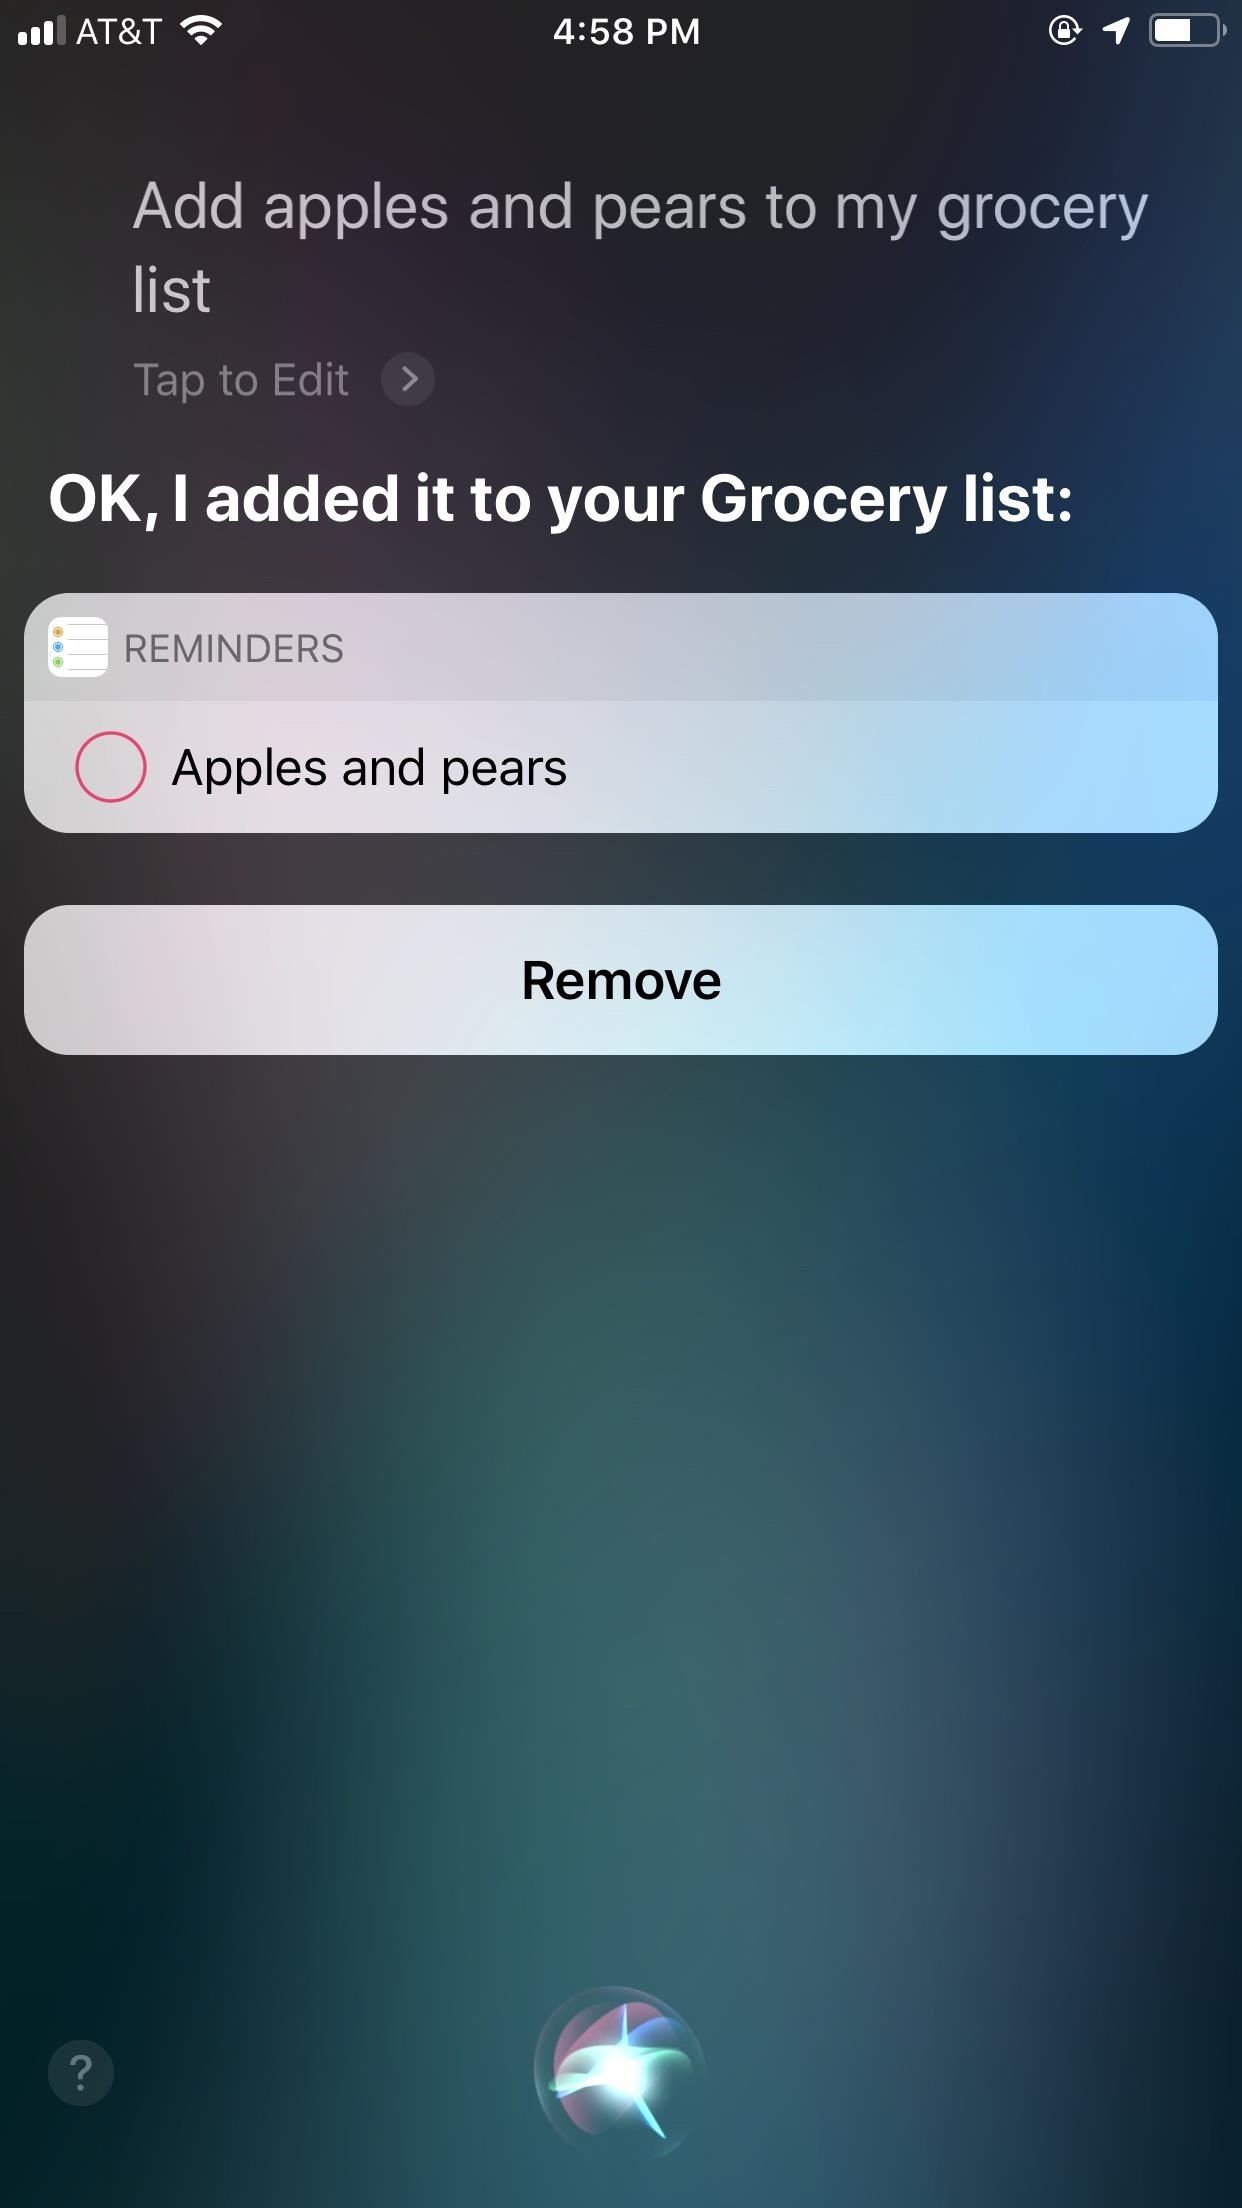 The Best New Siri Features & Commands in iOS 13 for iPhone